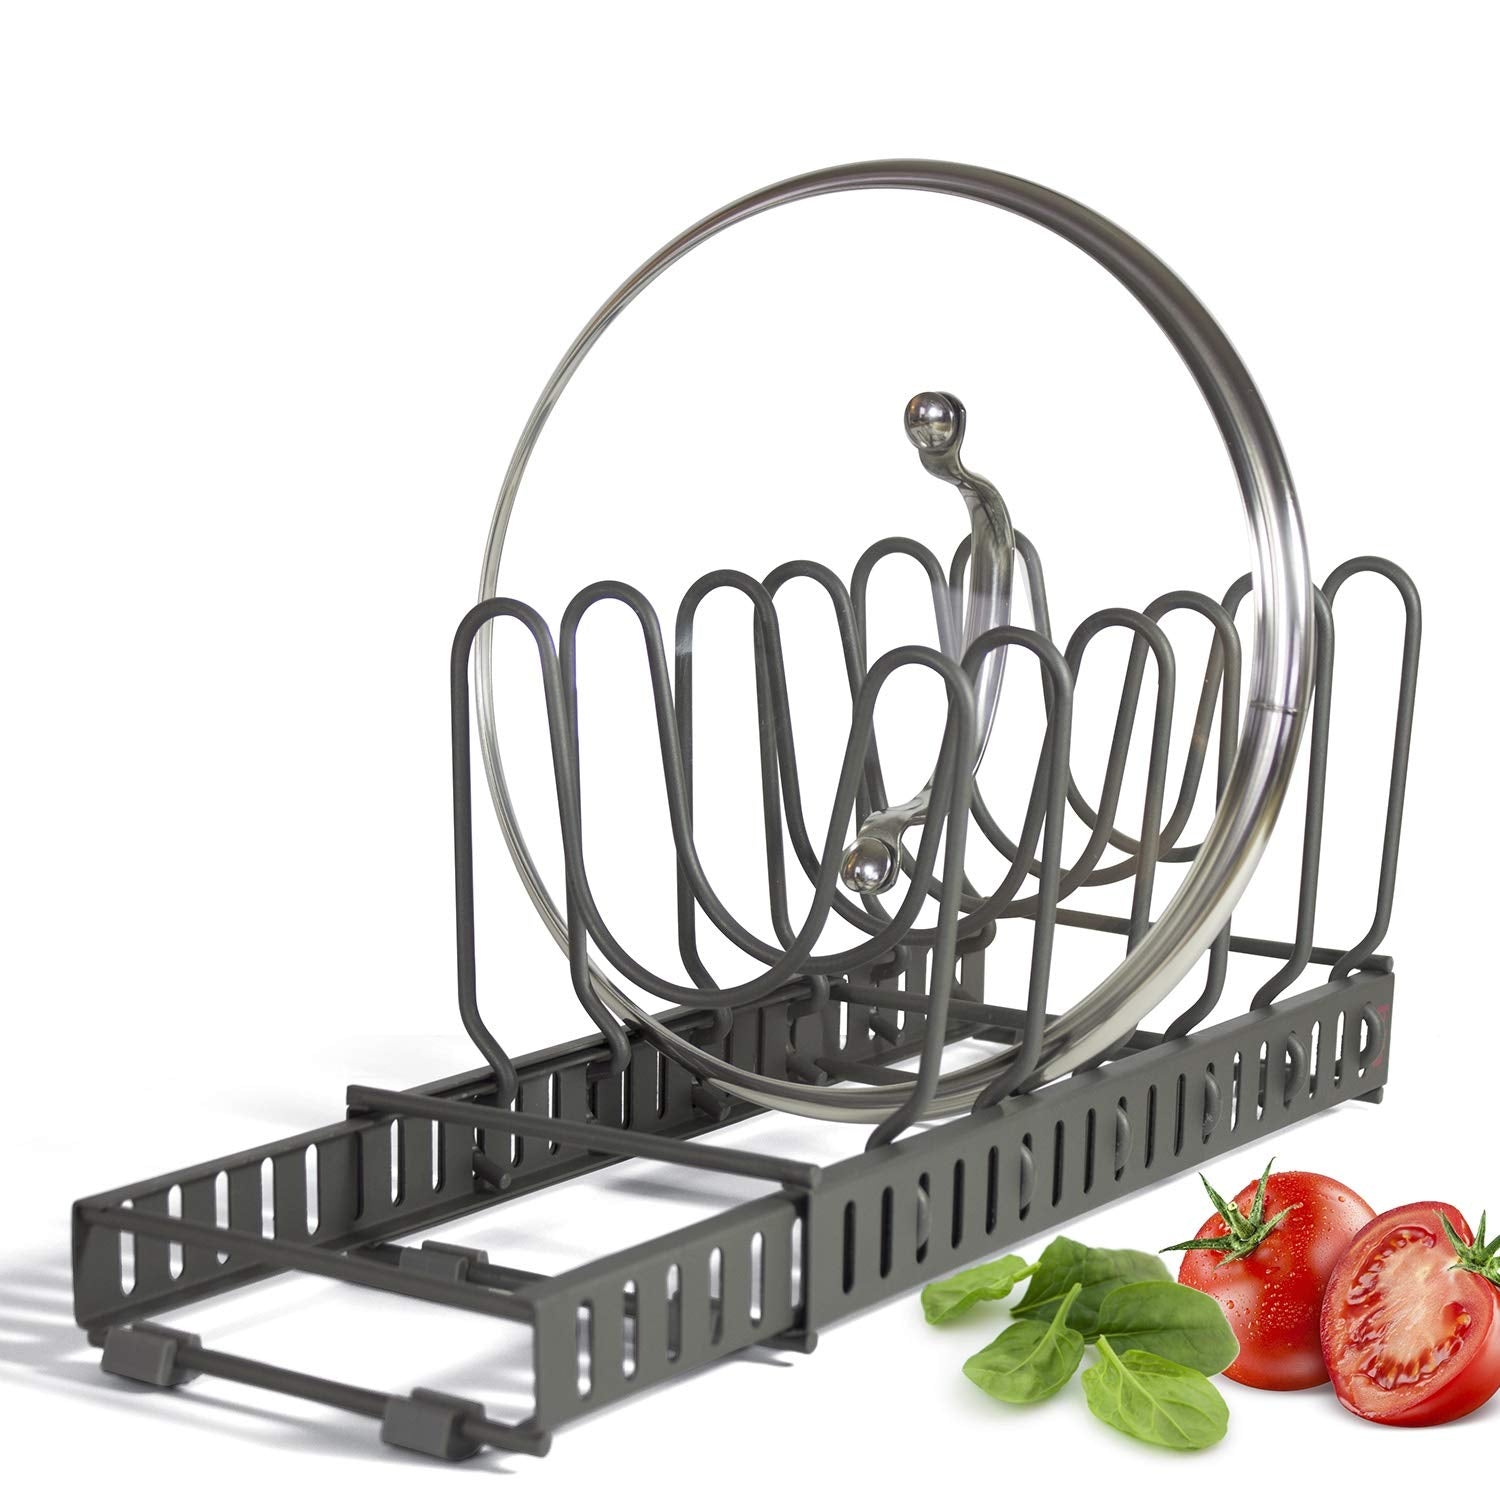 9+ Lids - BetterThingsHome Expandable Lid Holder: Total 10 Adjustable Compartments, Stores 9+ Lids, Can Be Extended to 22.25", Kitchen Cookware Pan Pot Lid Organizer Rack - Brand New Updated